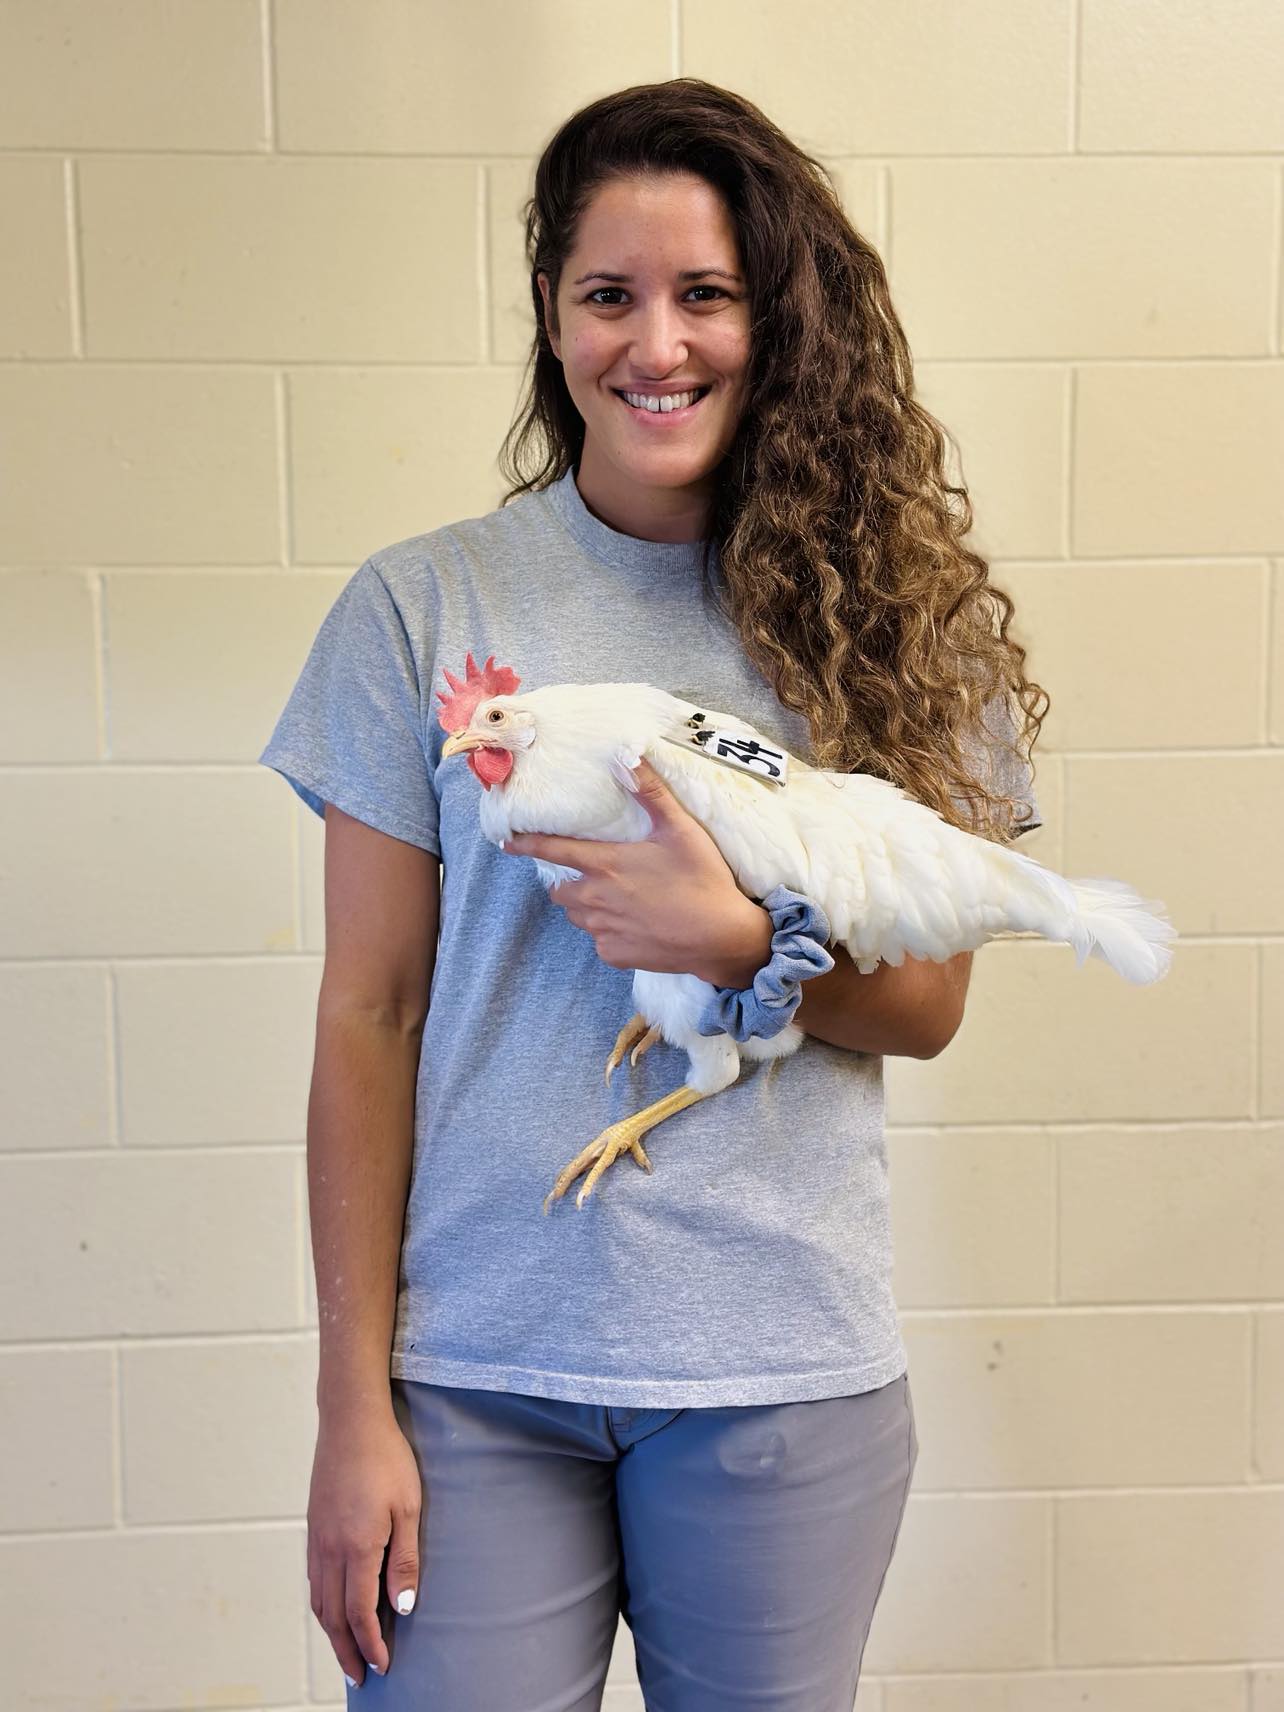  A woman with curling hair wearing a t-shirt and jeans holding a white chicken.